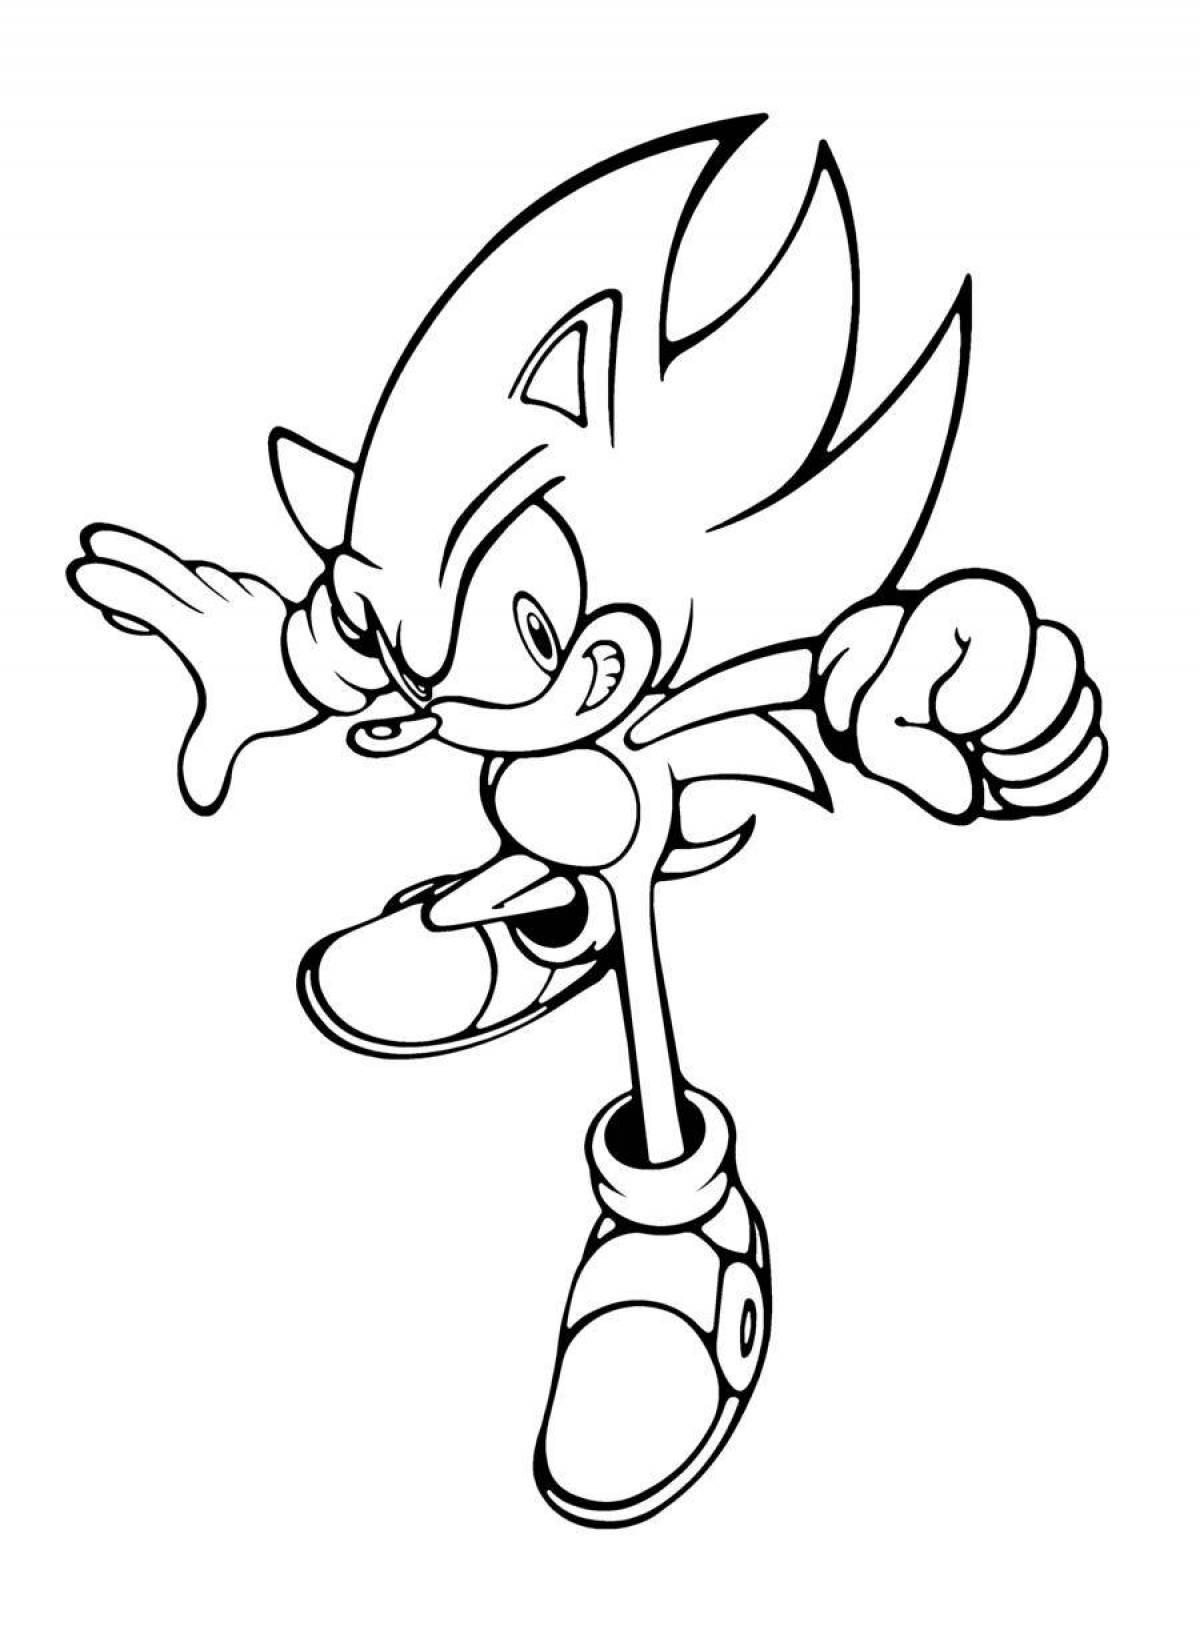 Comic sonic exe coloring book for kids